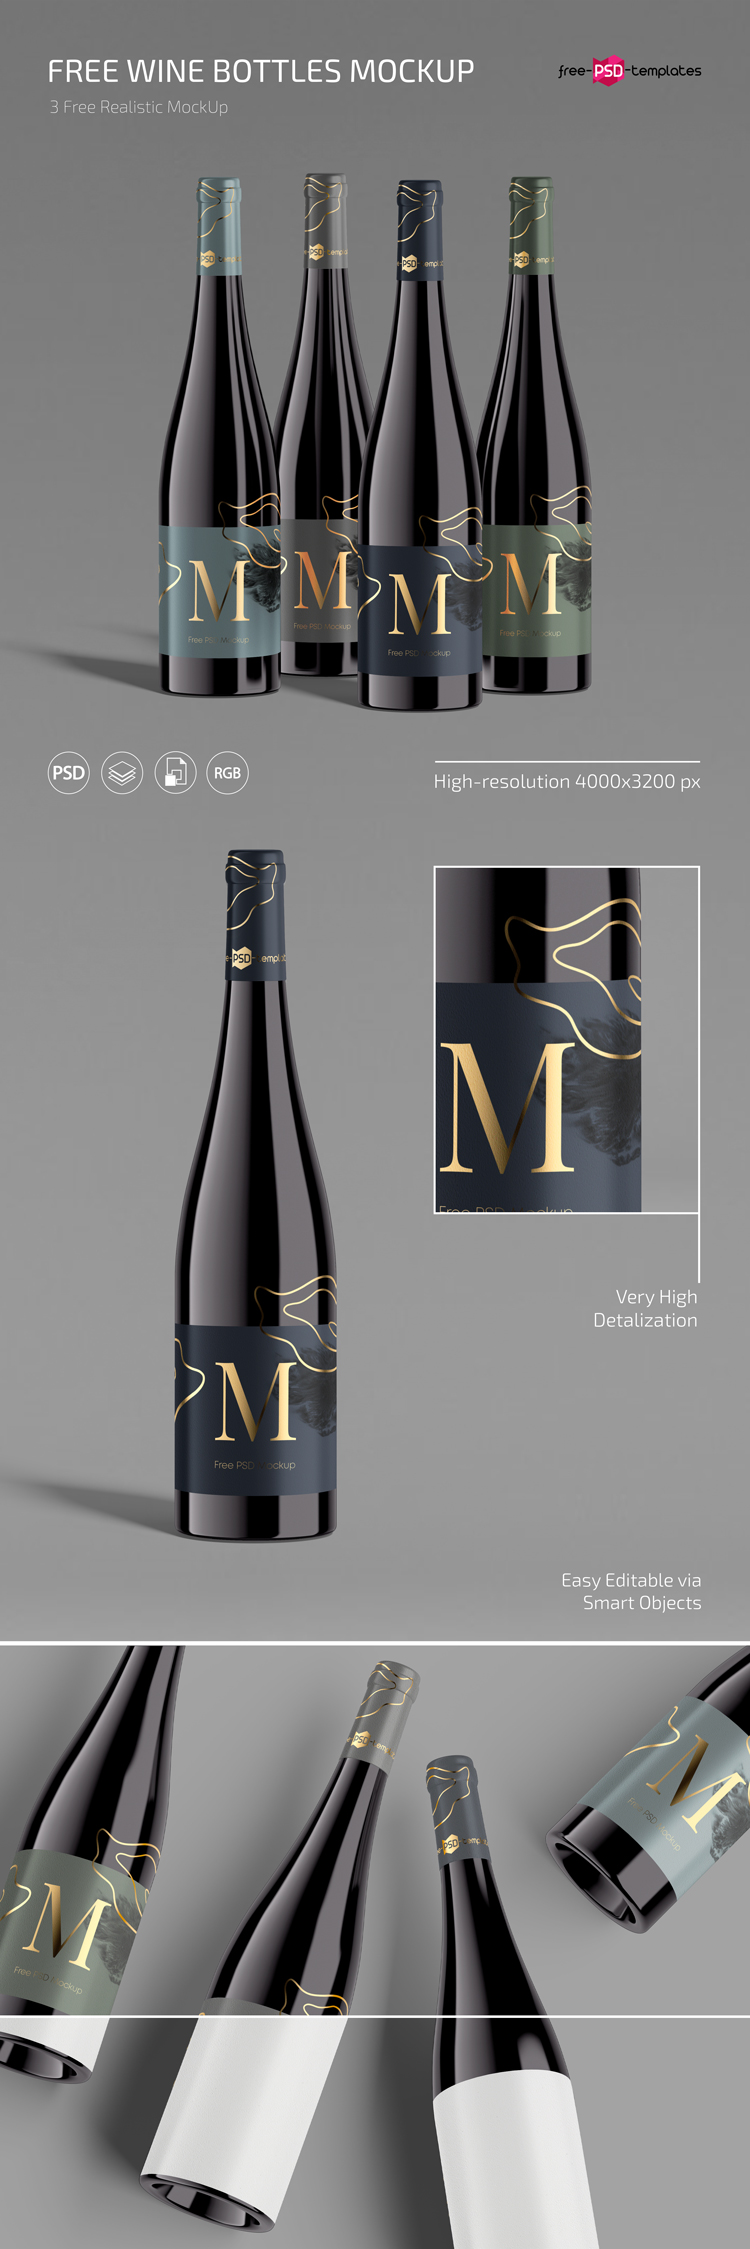 Download Free Wine Bottle Mockup Set In Psd Free Psd Templates